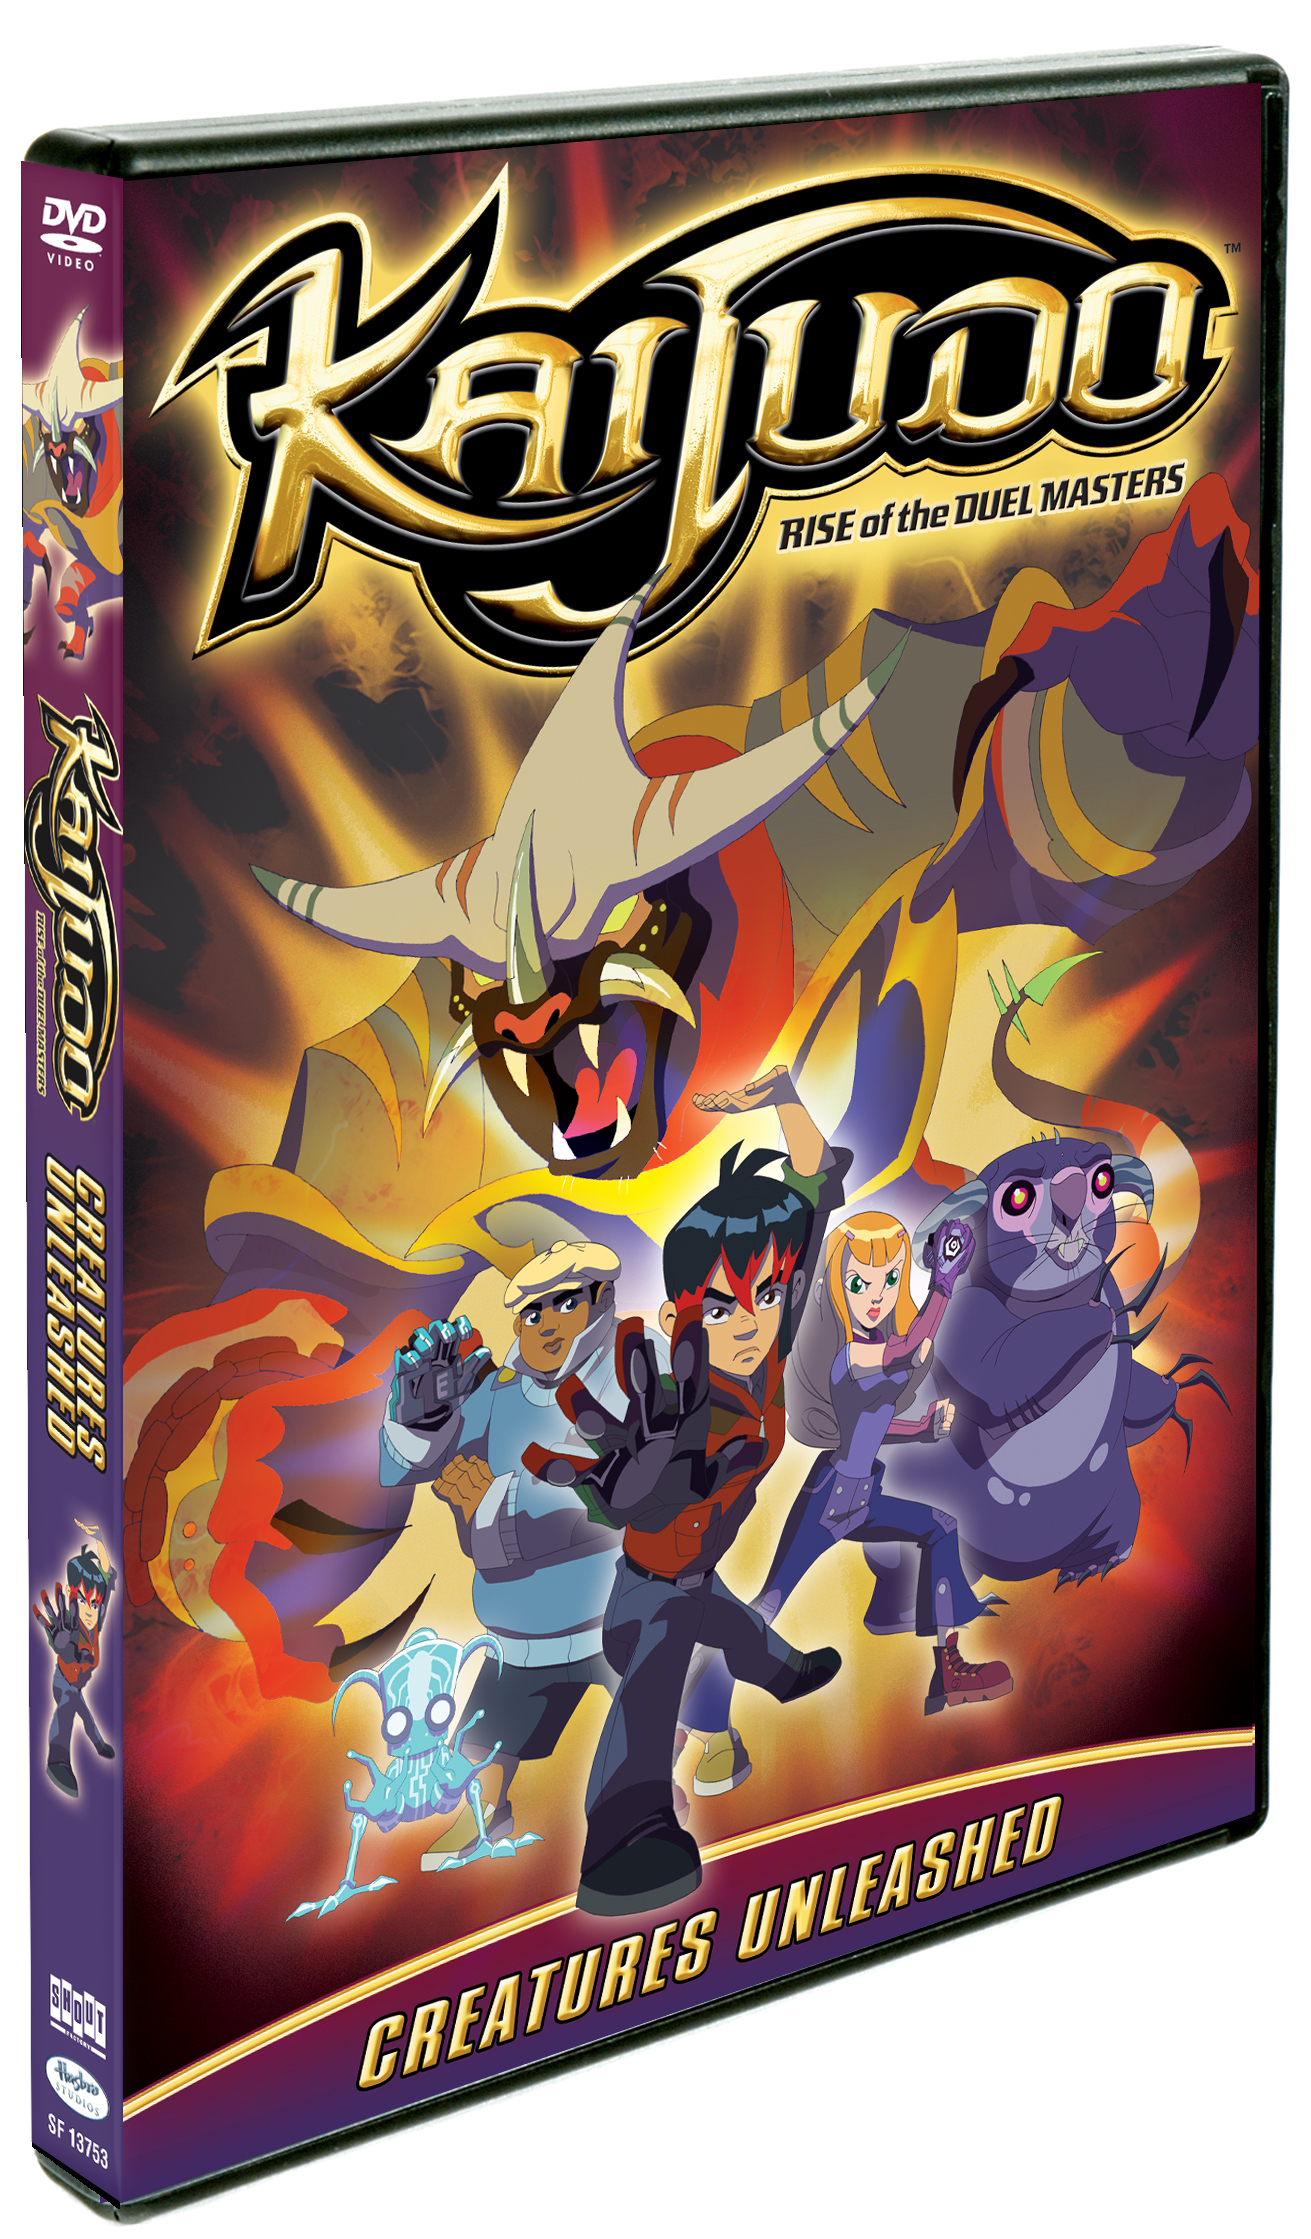 DVD Cover with Protagonists from Kaijudo: Creatures Unleashed